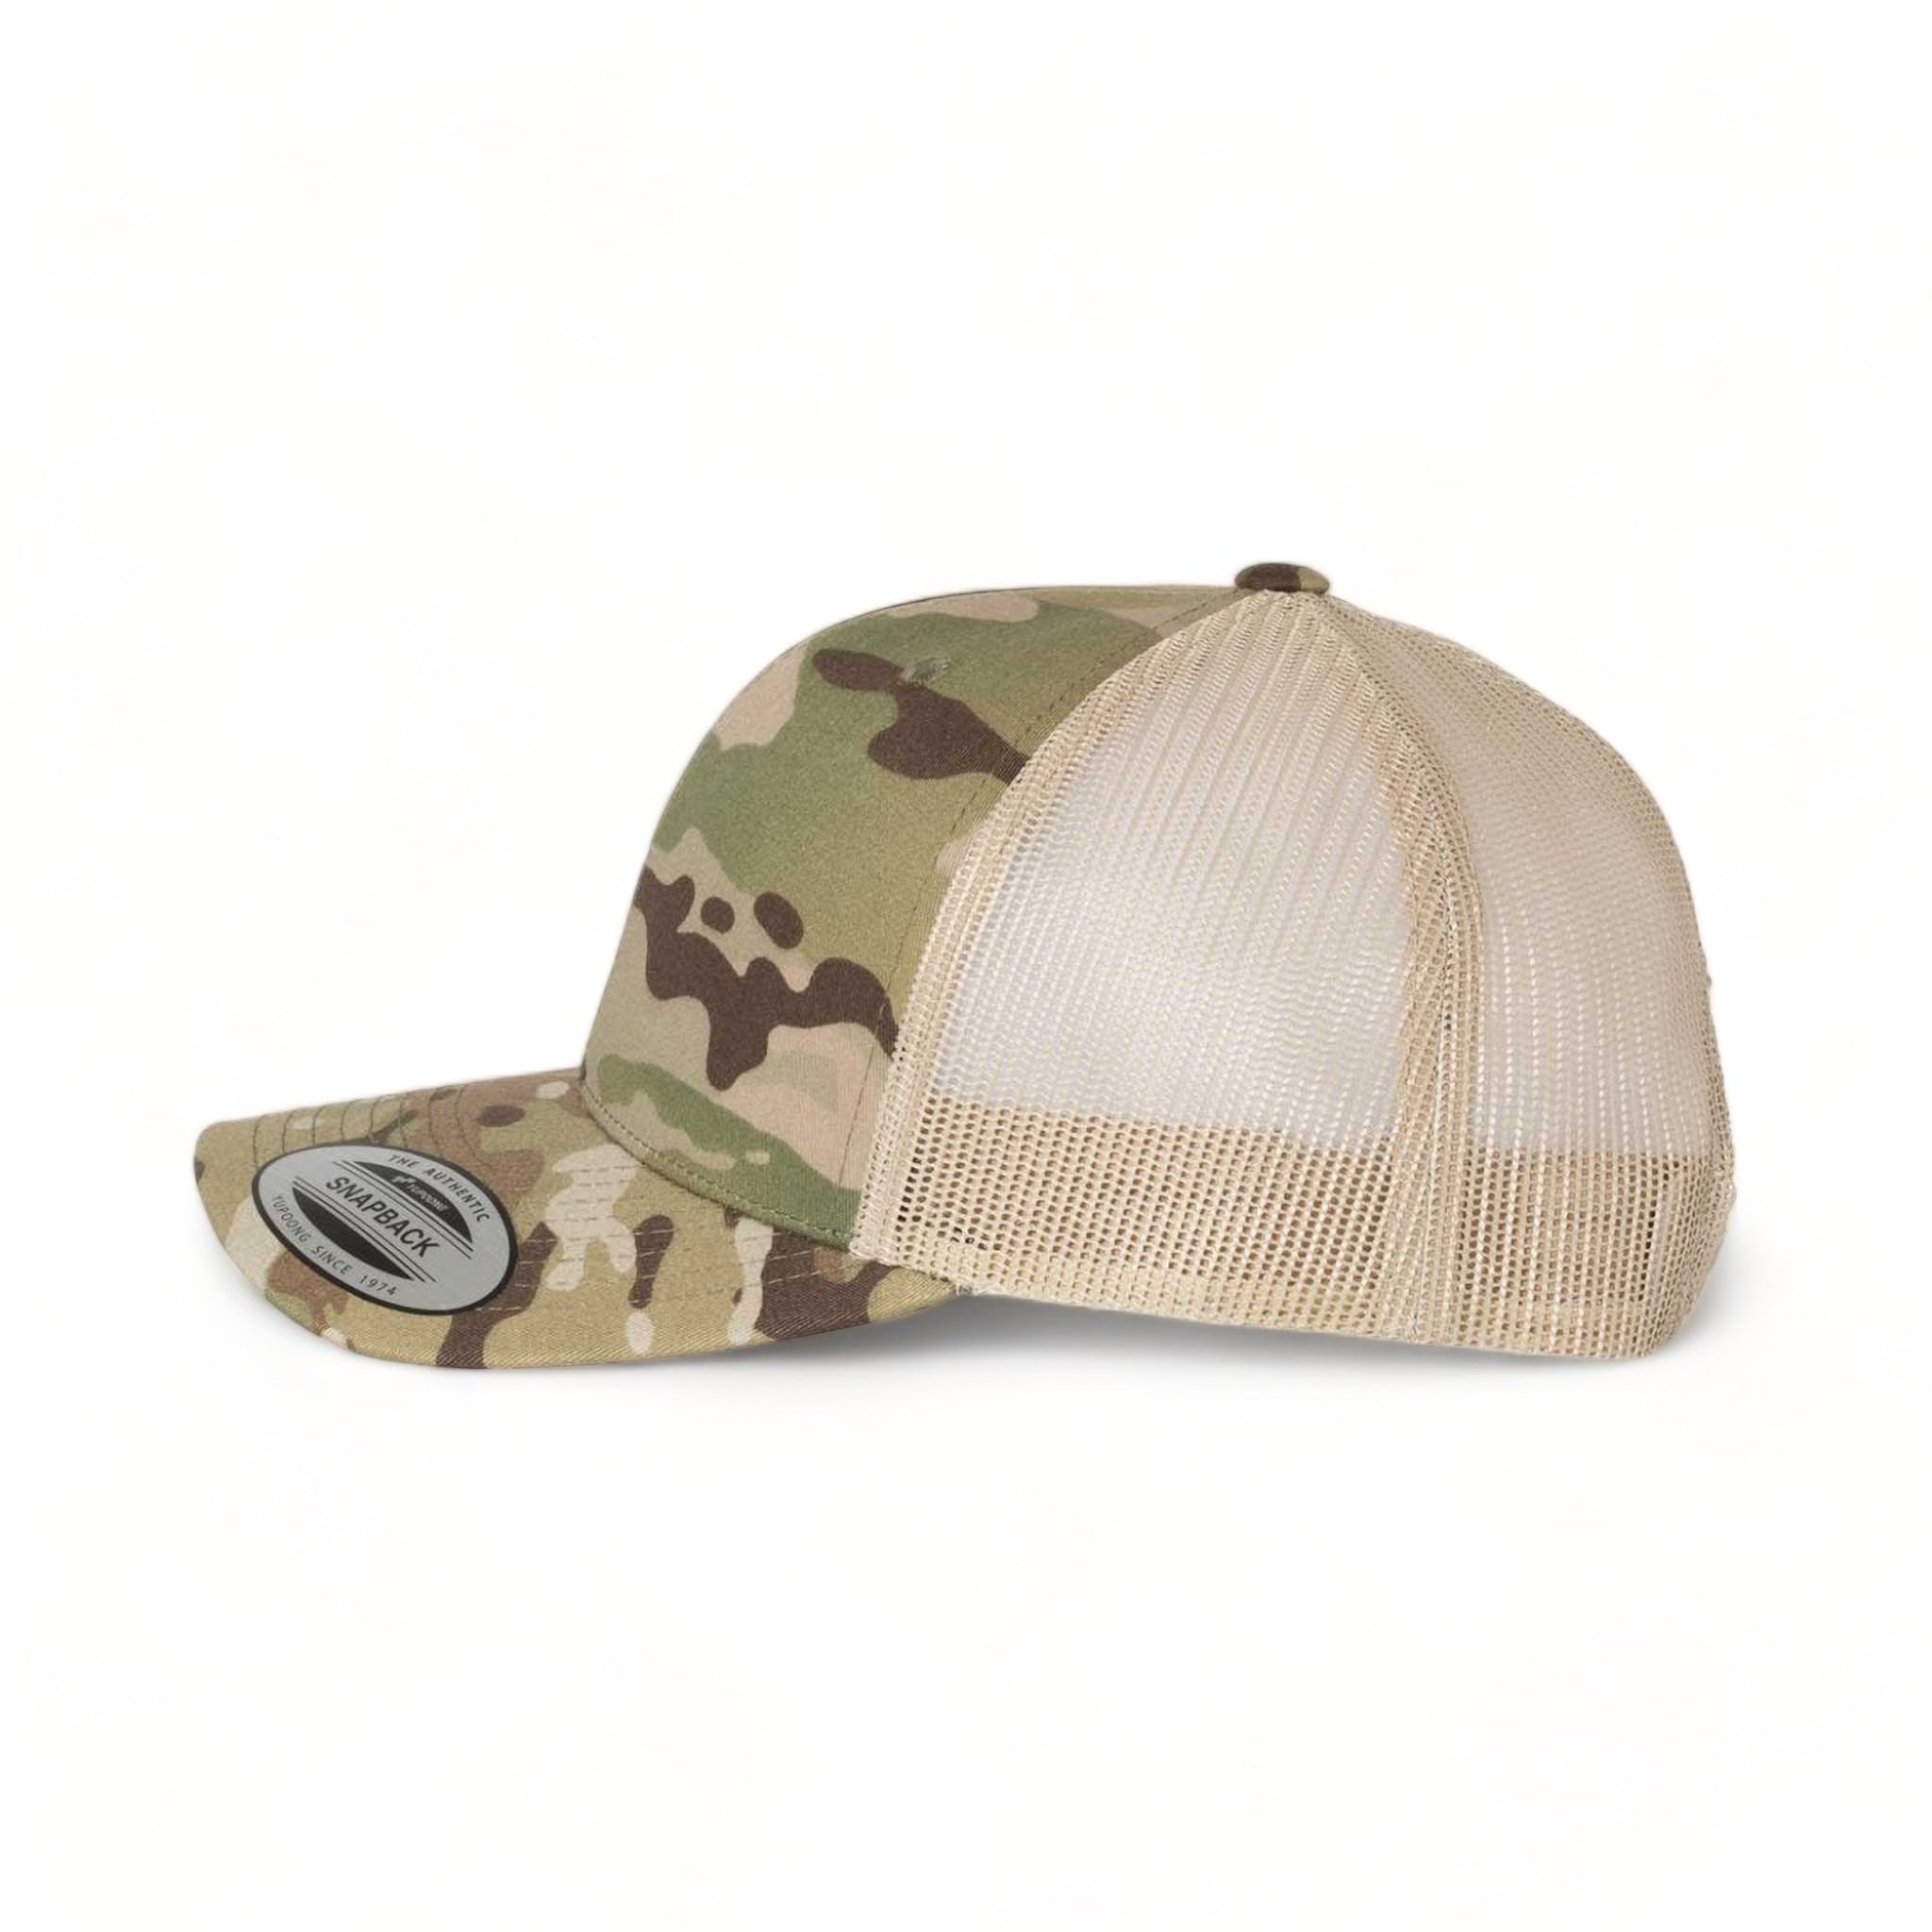 Side view of YP Classics 6606 custom hat in multicam green and khaki